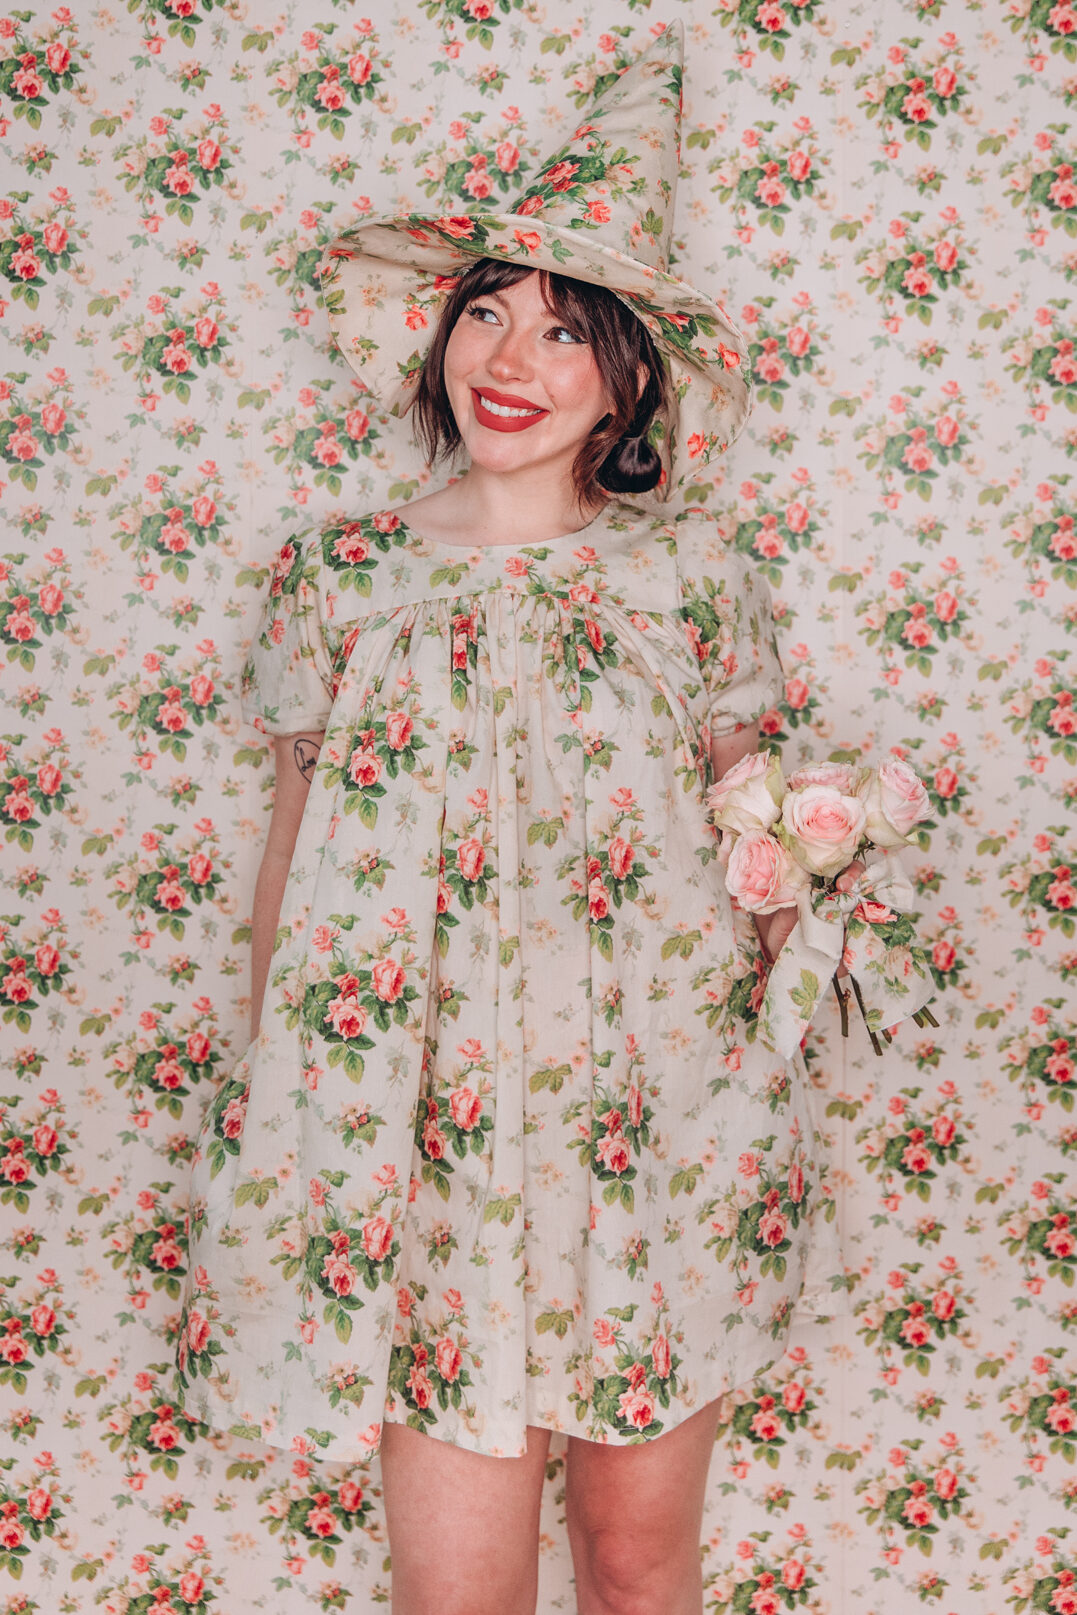 Keiko in a floral witch hat with a matching dress in front of a backdrop made of the same design. She's holding flowers in her right hand, looking up to the left.